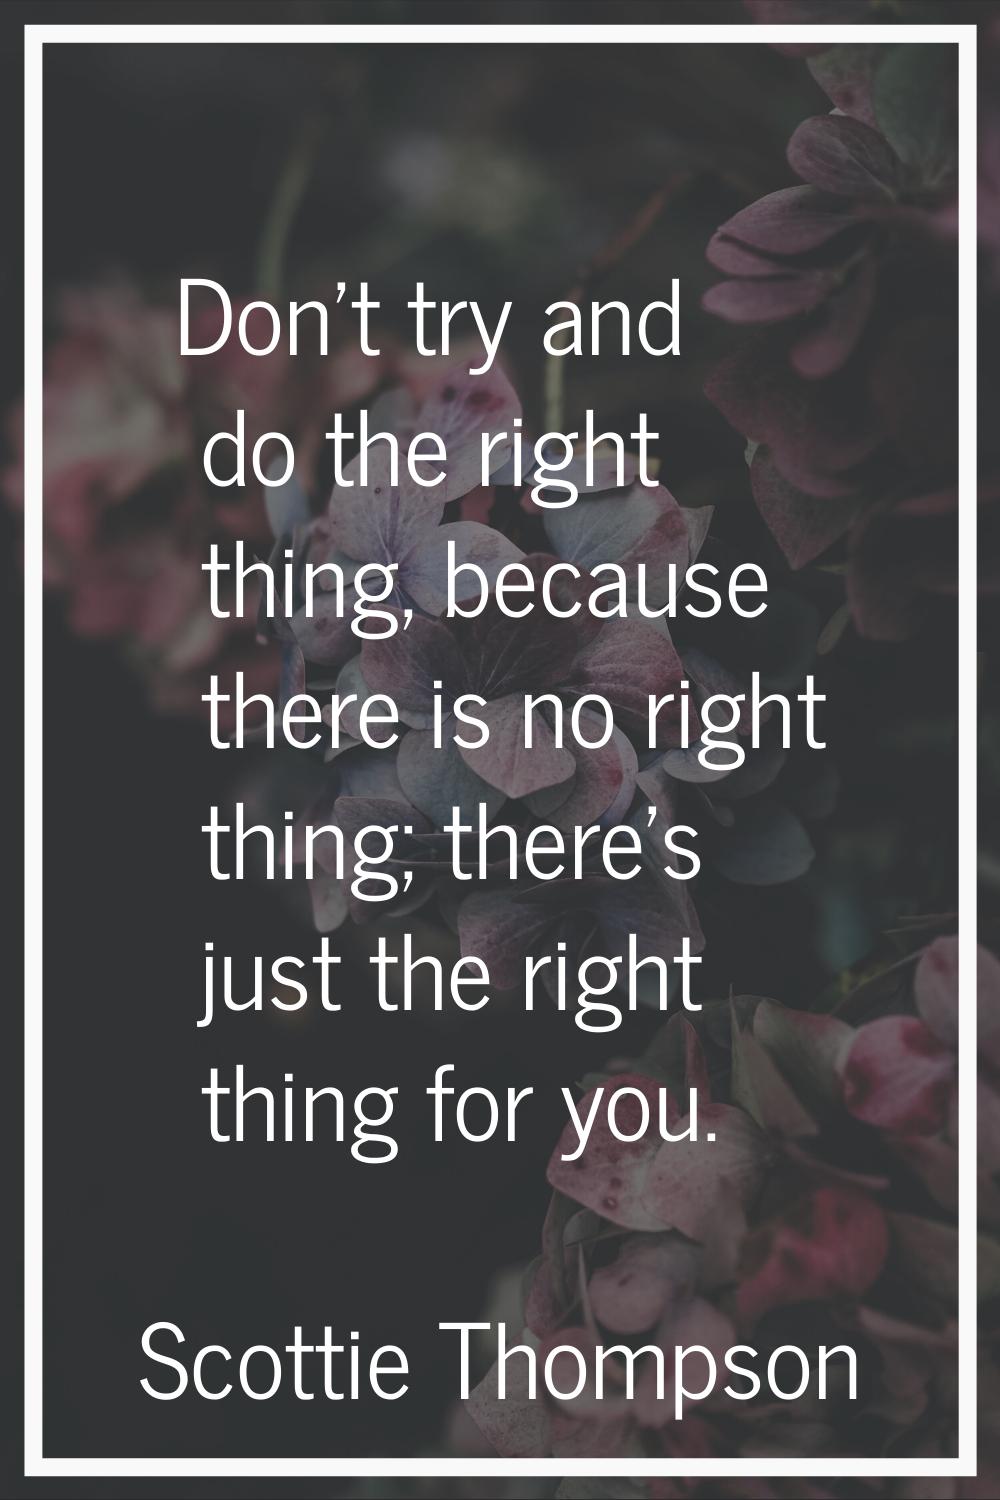 Don't try and do the right thing, because there is no right thing; there's just the right thing for